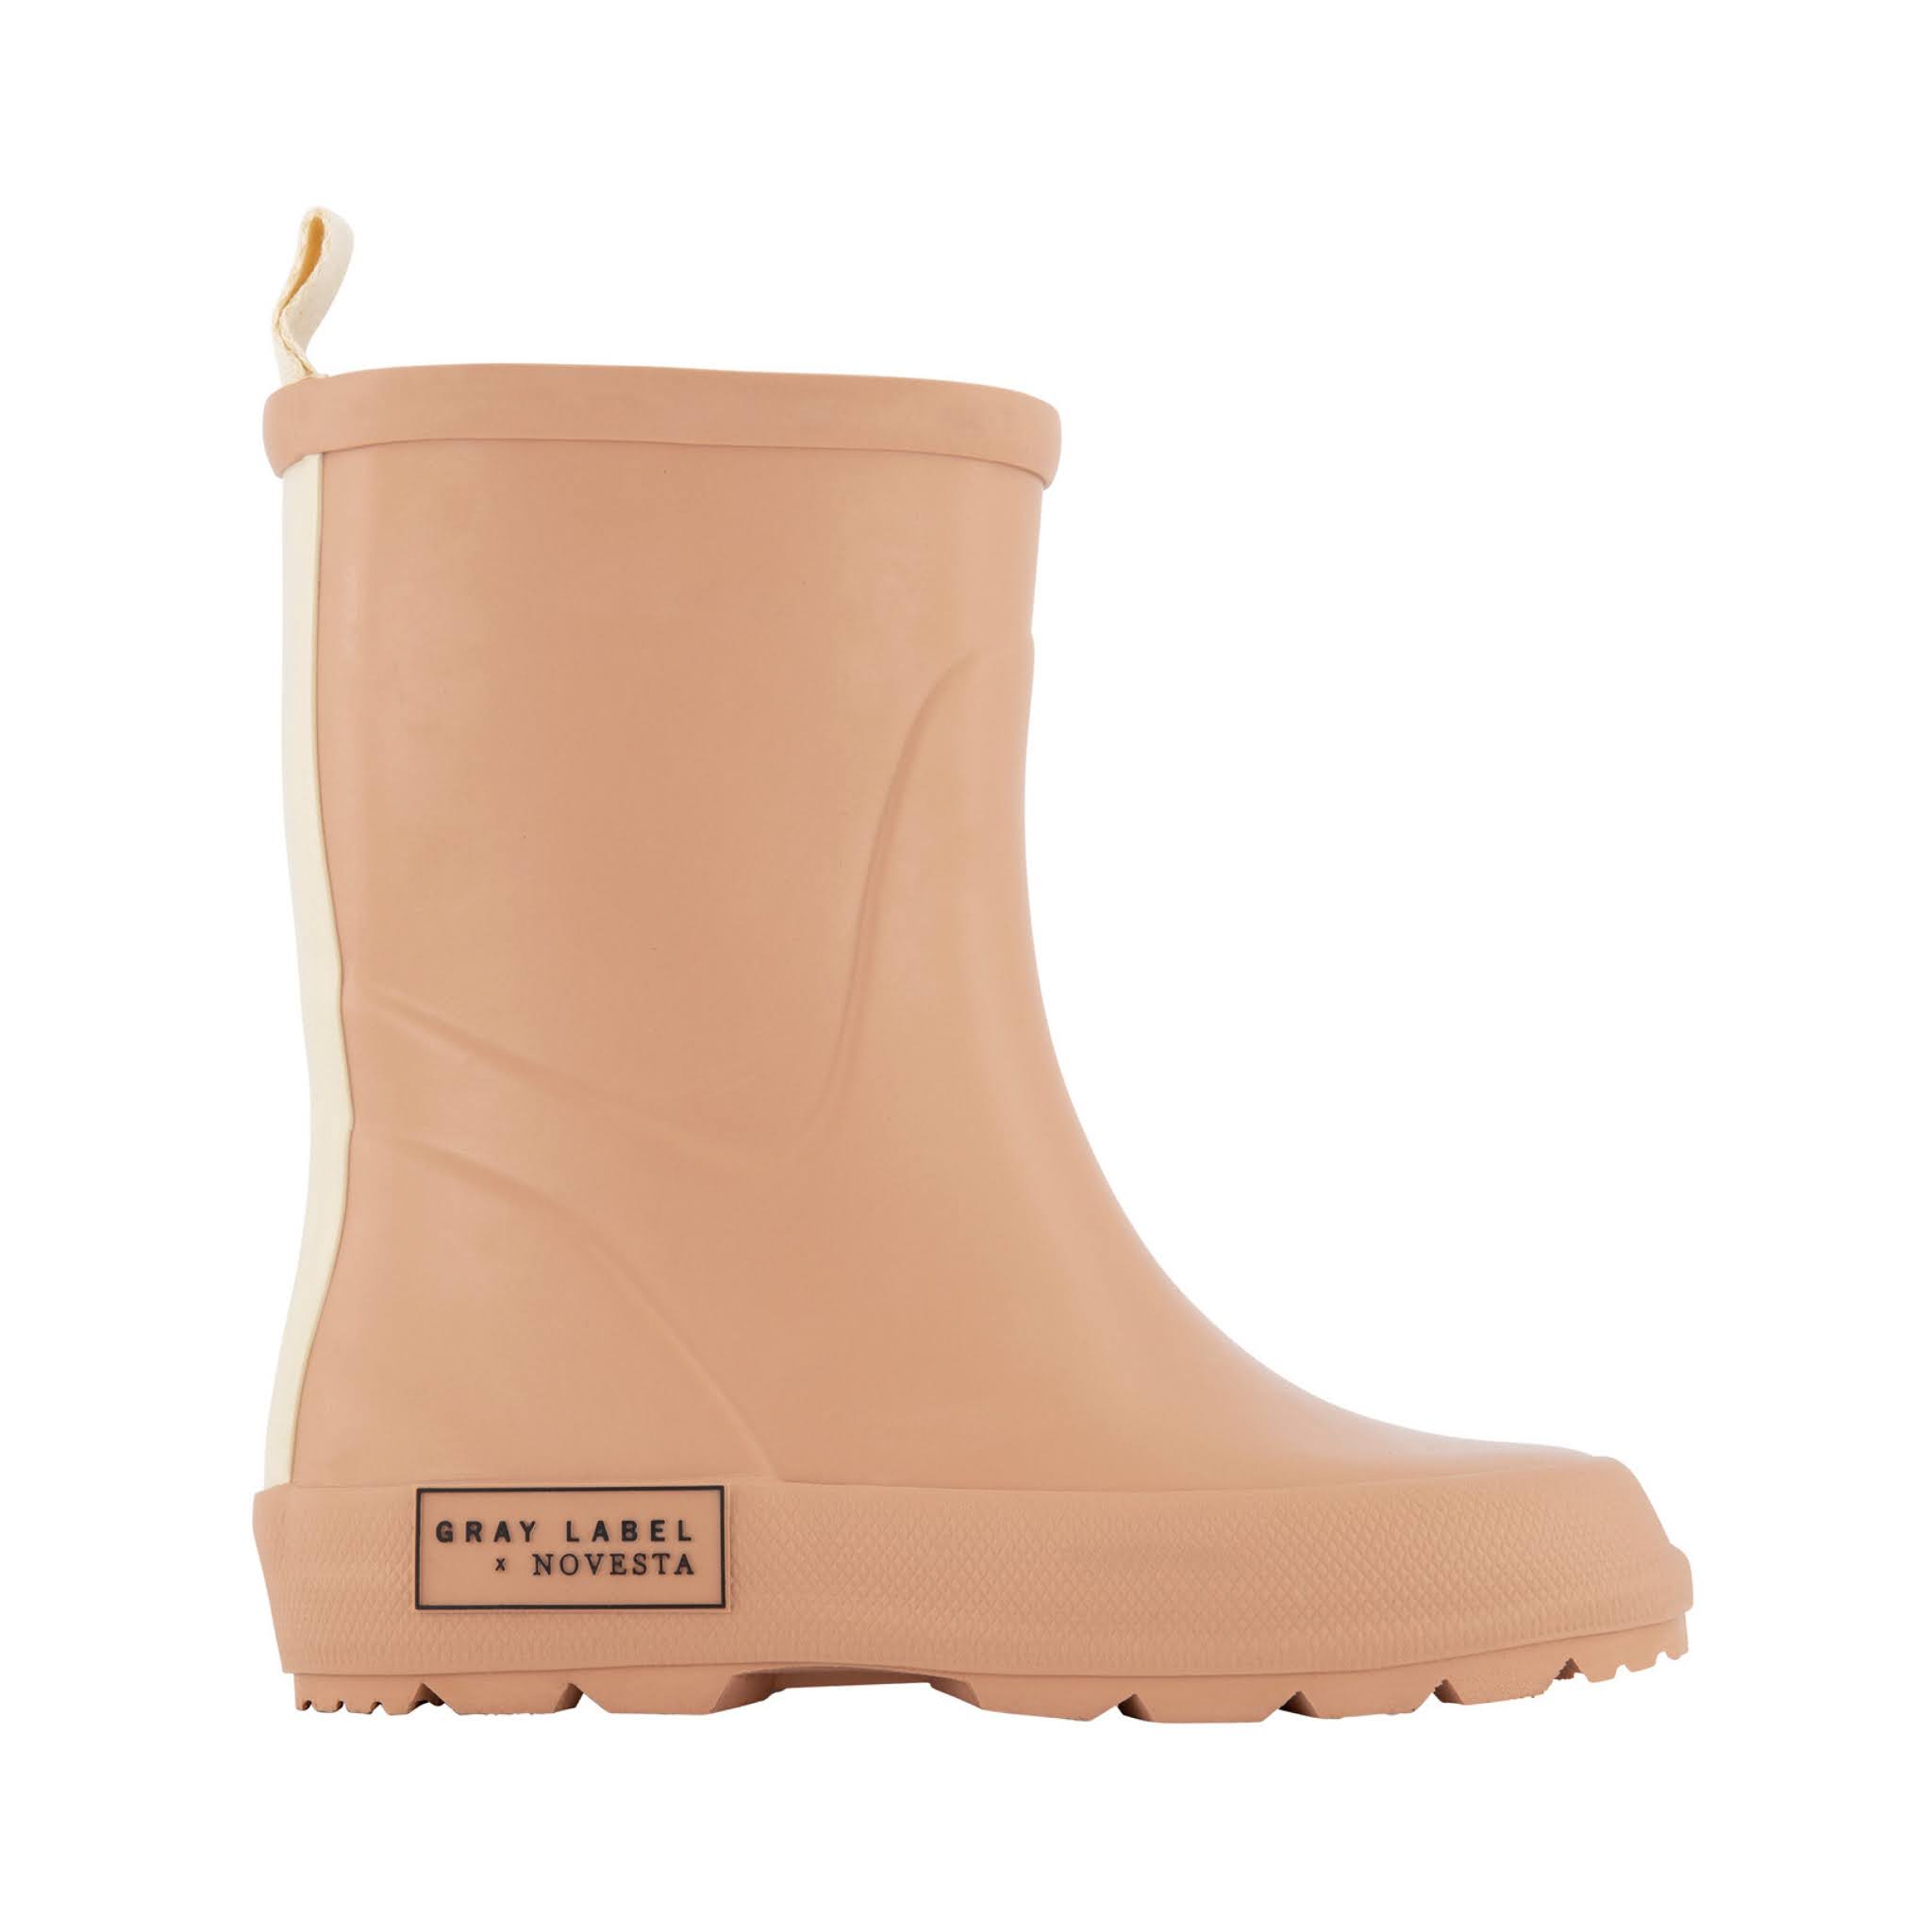 Girls Dusty Pink Rain Boots from Gray Label